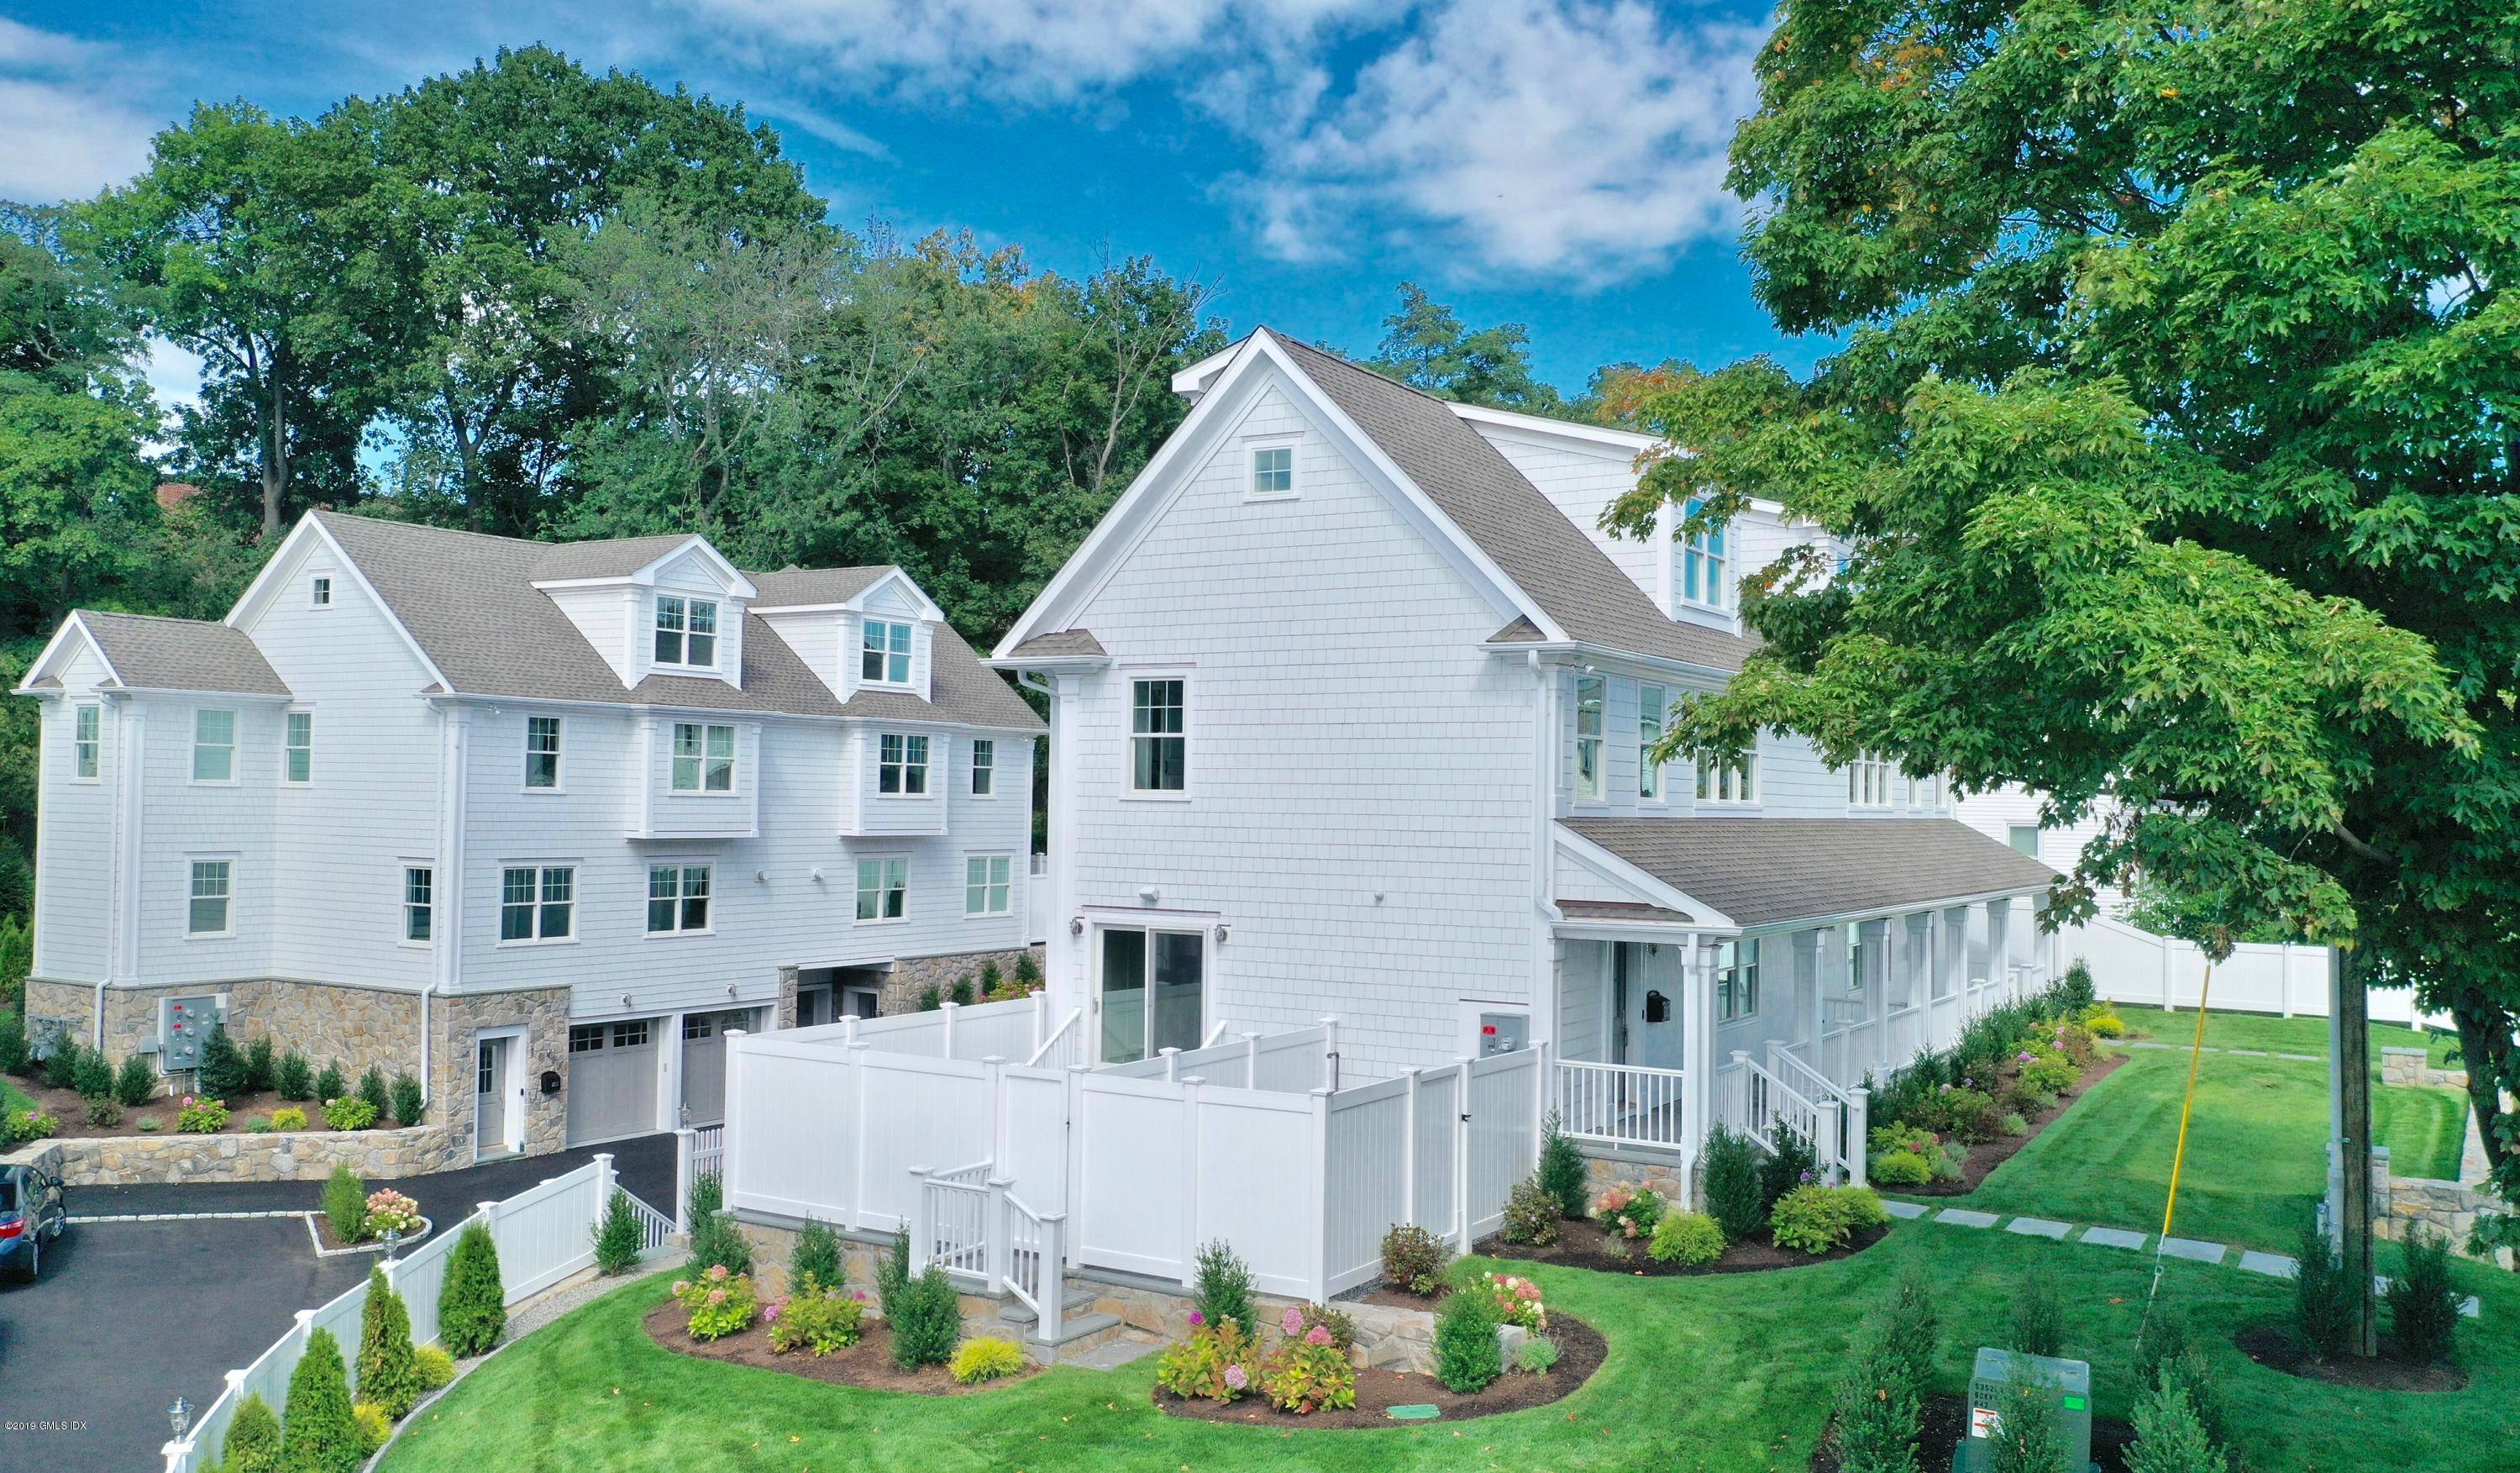 Built in 2019, this luxury townhouse in downtown Greenwich, CT, combines modern living with unparalleled convenience to NYC.